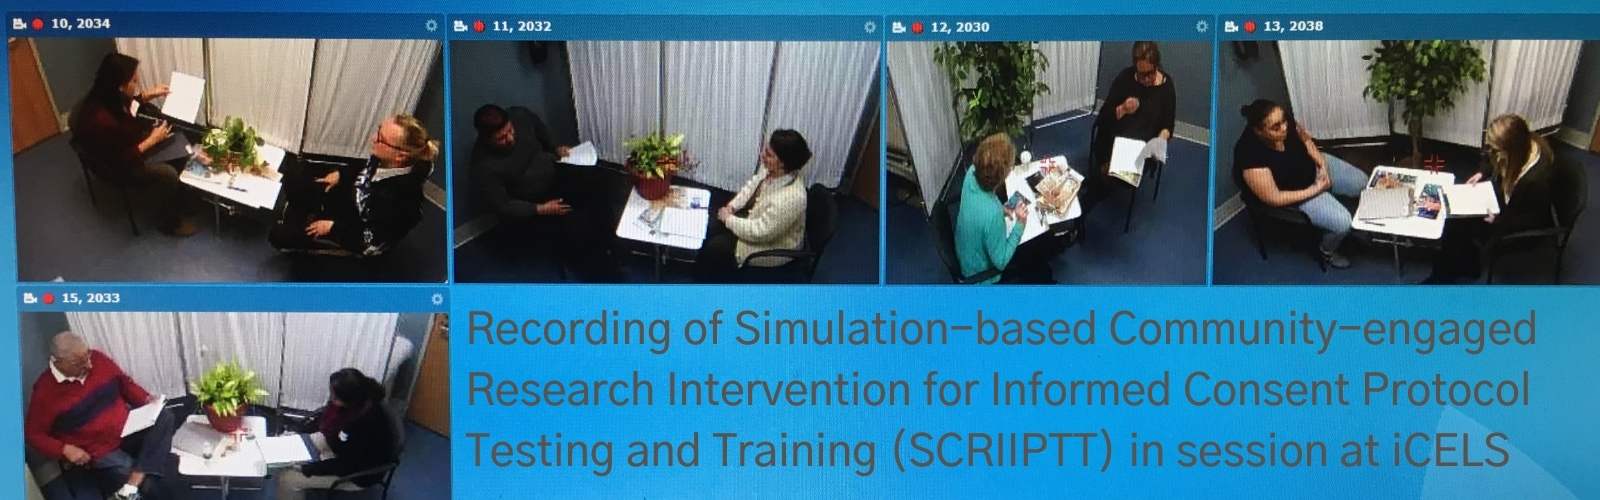 iCELS-SCRIIPTT-Simulation-based-Community-engaged-Research-Intervention for-Informed-Consent-Protocol-Testing-and-Training-sessions.jpg